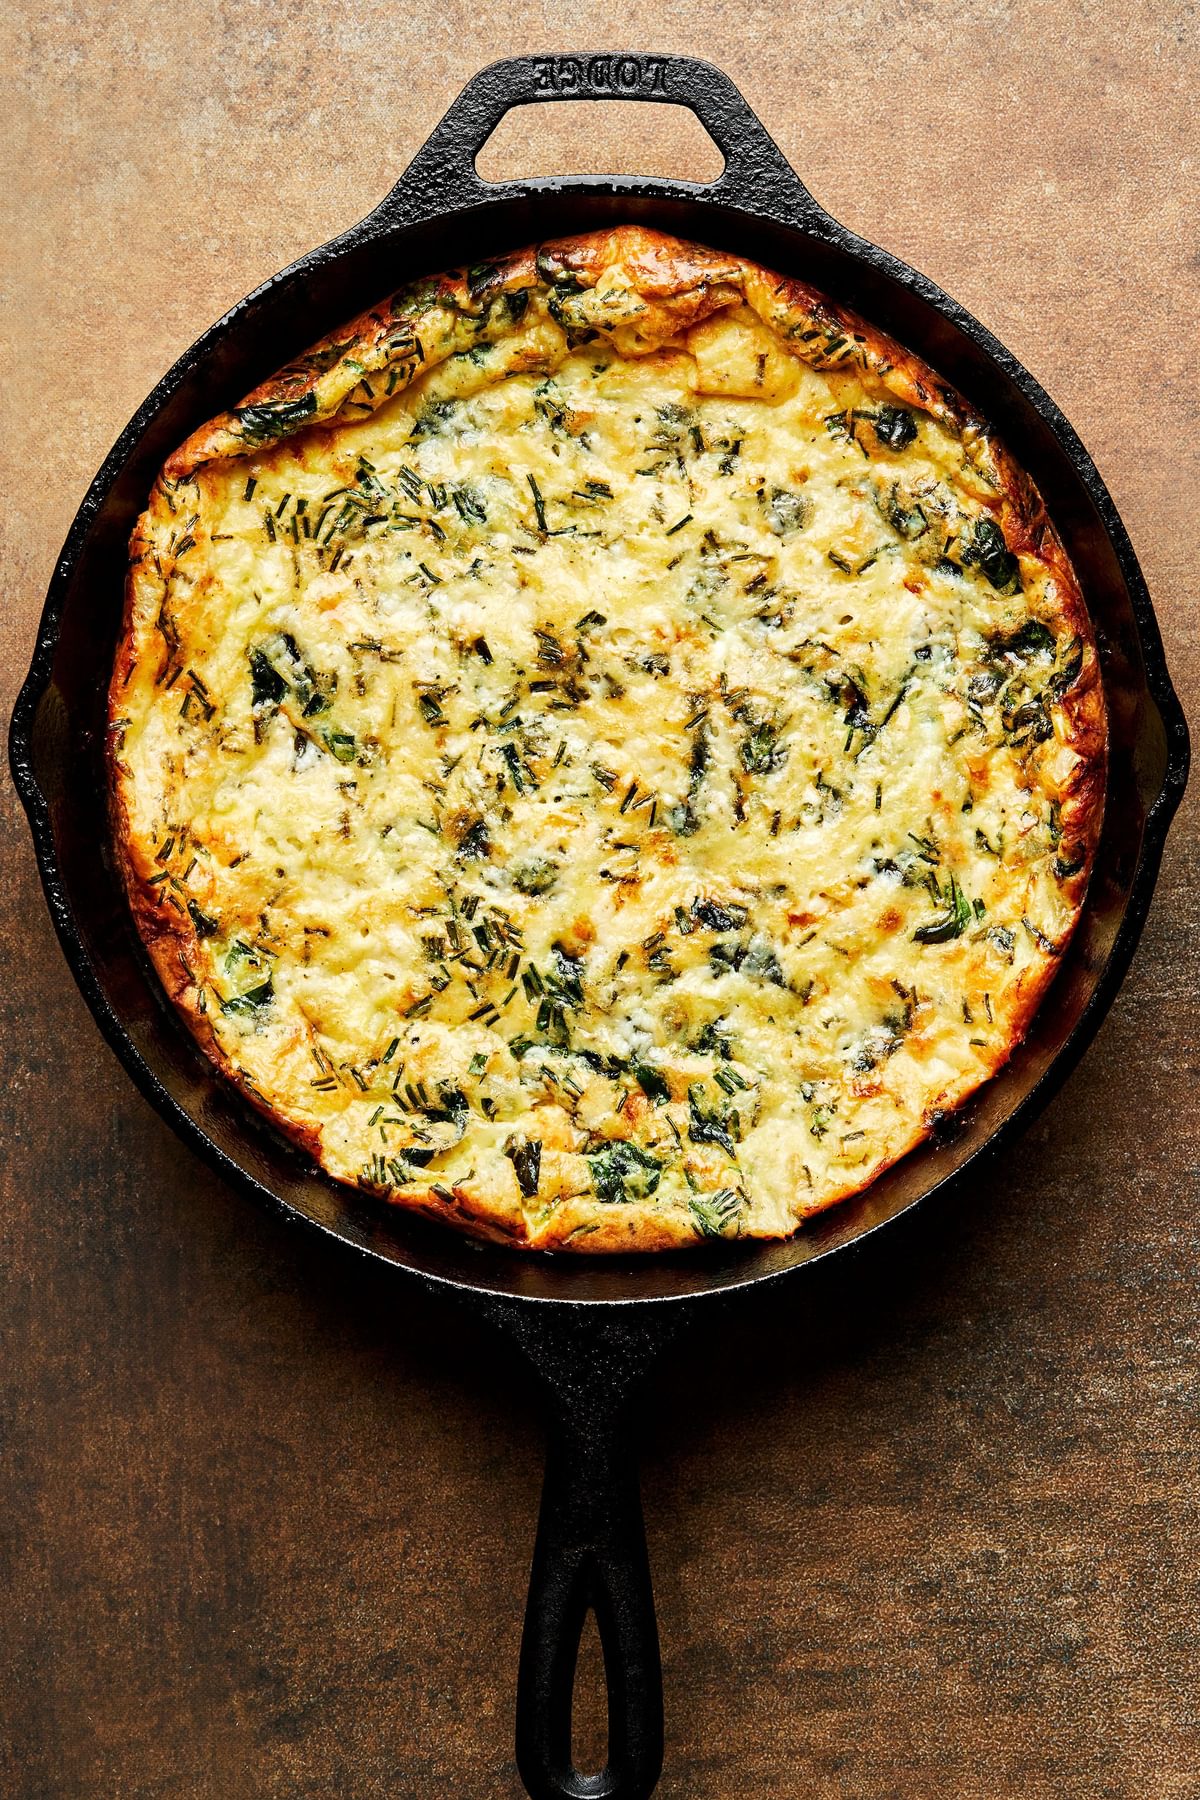 a homemade frittata fresh out of the oven in a cast iron skillet made with eggs, milk, cheese, vegetables and spices